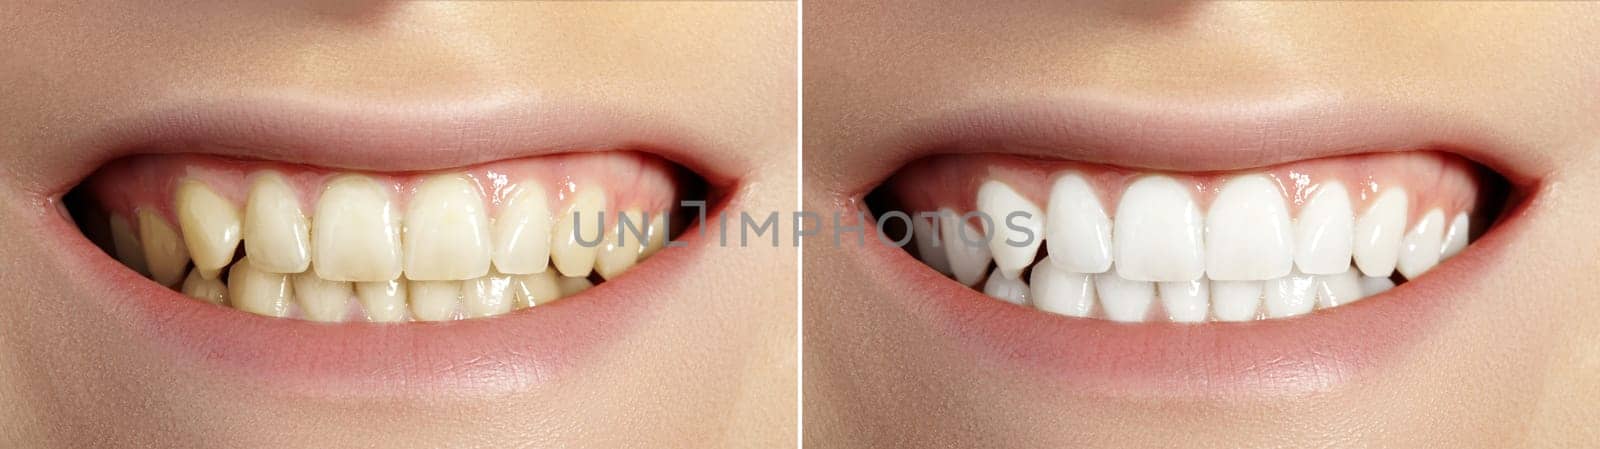 Woman Teeth Before and After Whitening. Perfect Smile with Healthy Teeth. Dental Clinic Patient. Oral Care Dentistry and Stomatology